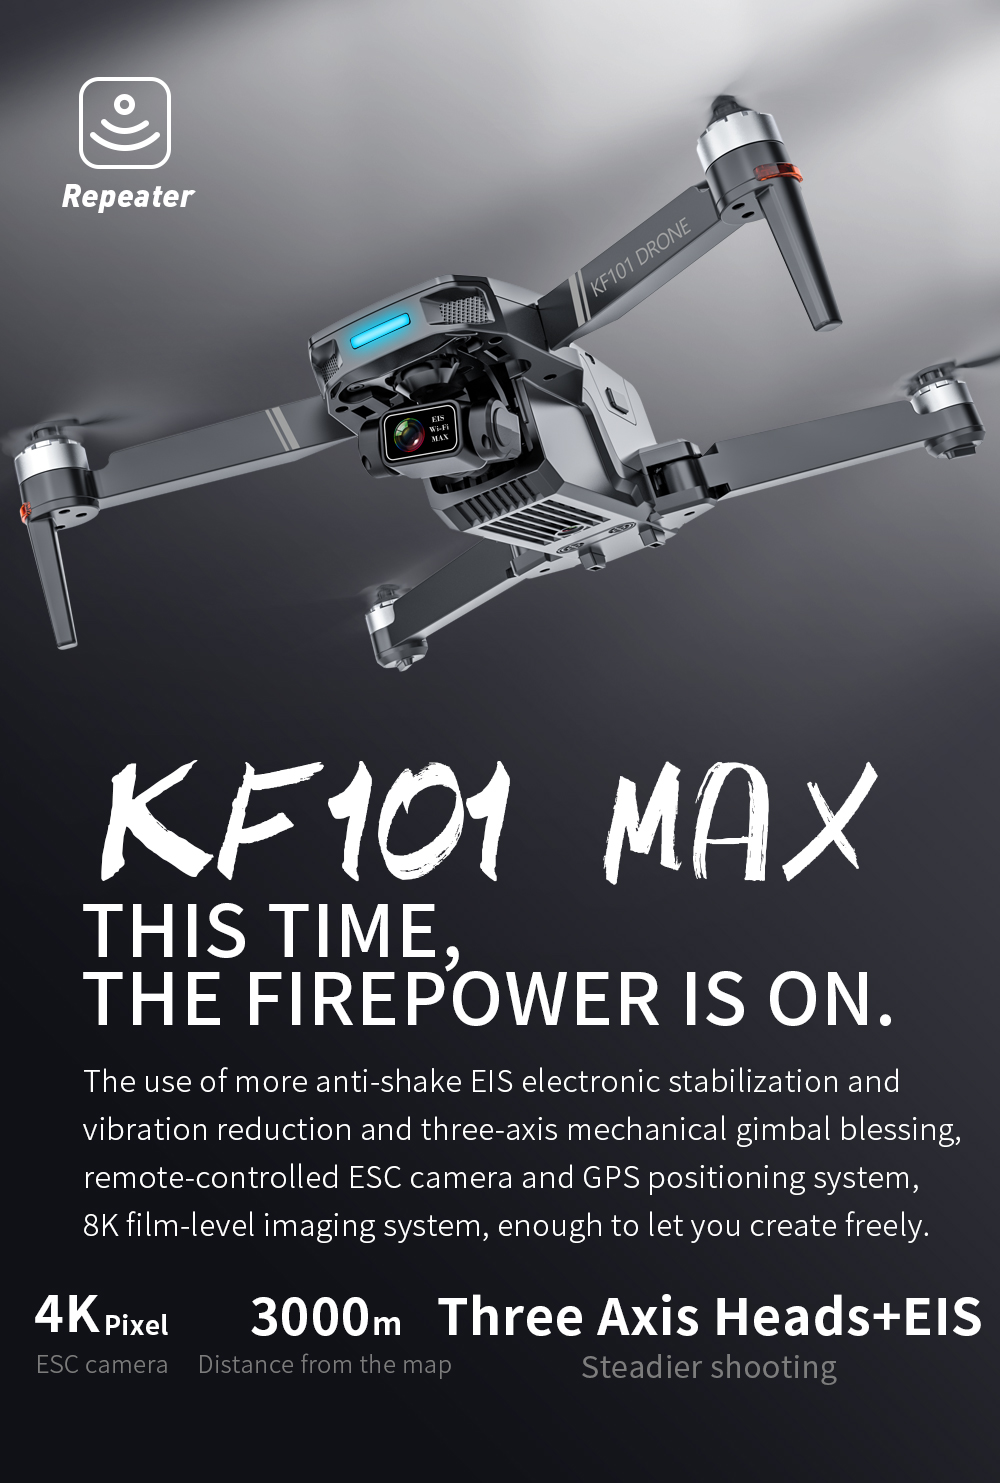 KF101-MAX-GPS-5G-WiFi-3KM-Repeater-FPV-with-4K-HD-ESC-Camera-3-Axis-EIS-Gimbal-Brushless-Foldable-RC-1853126-1